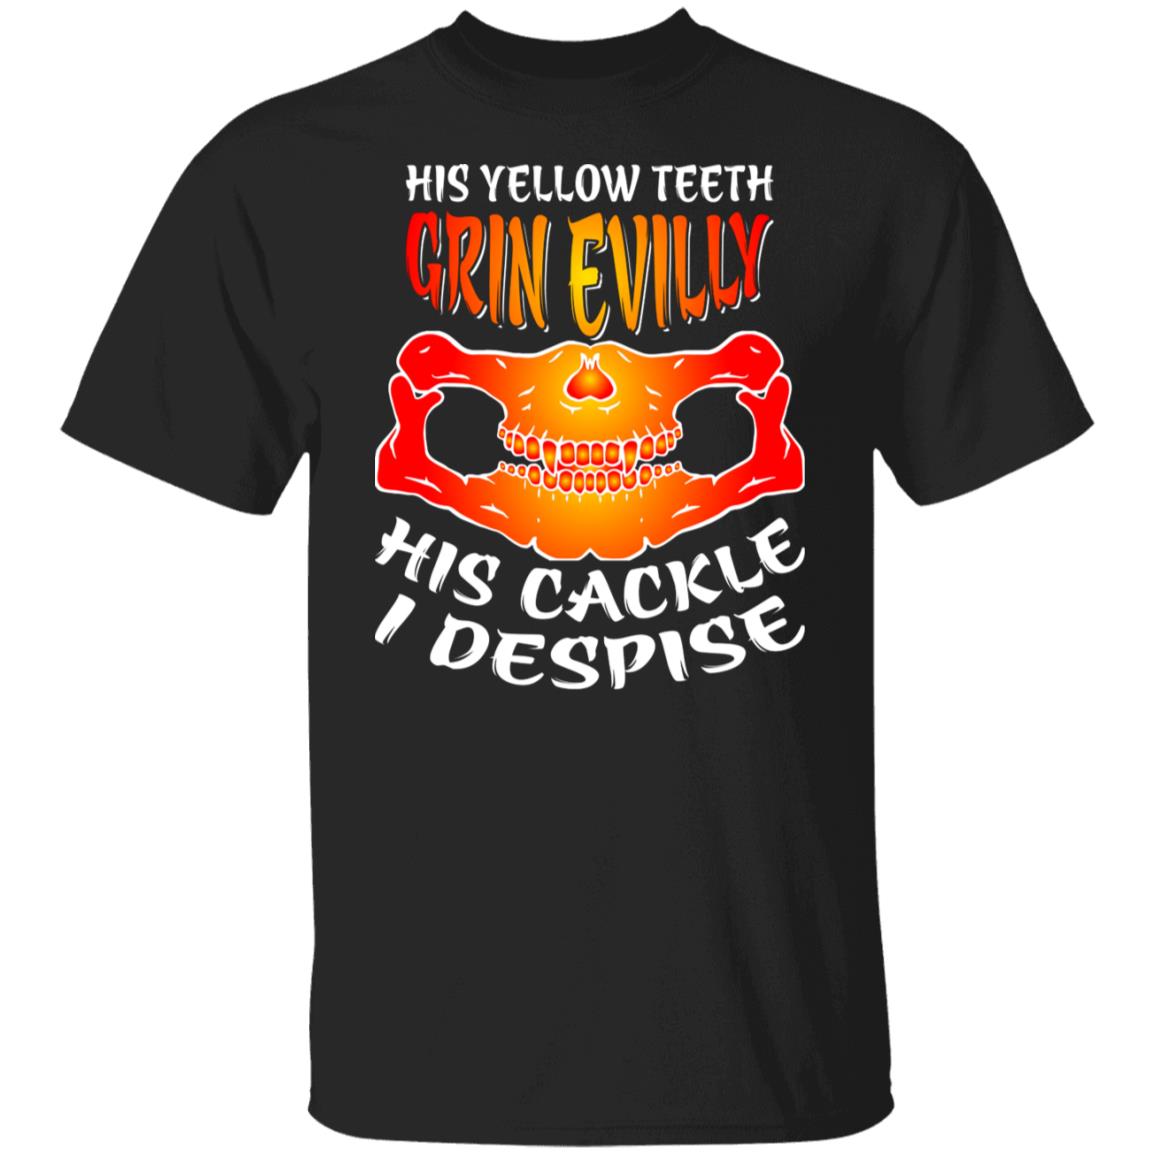 His Yellow Teeth Grin Evilly His Cackle I Despise Halloween Funny Shirt